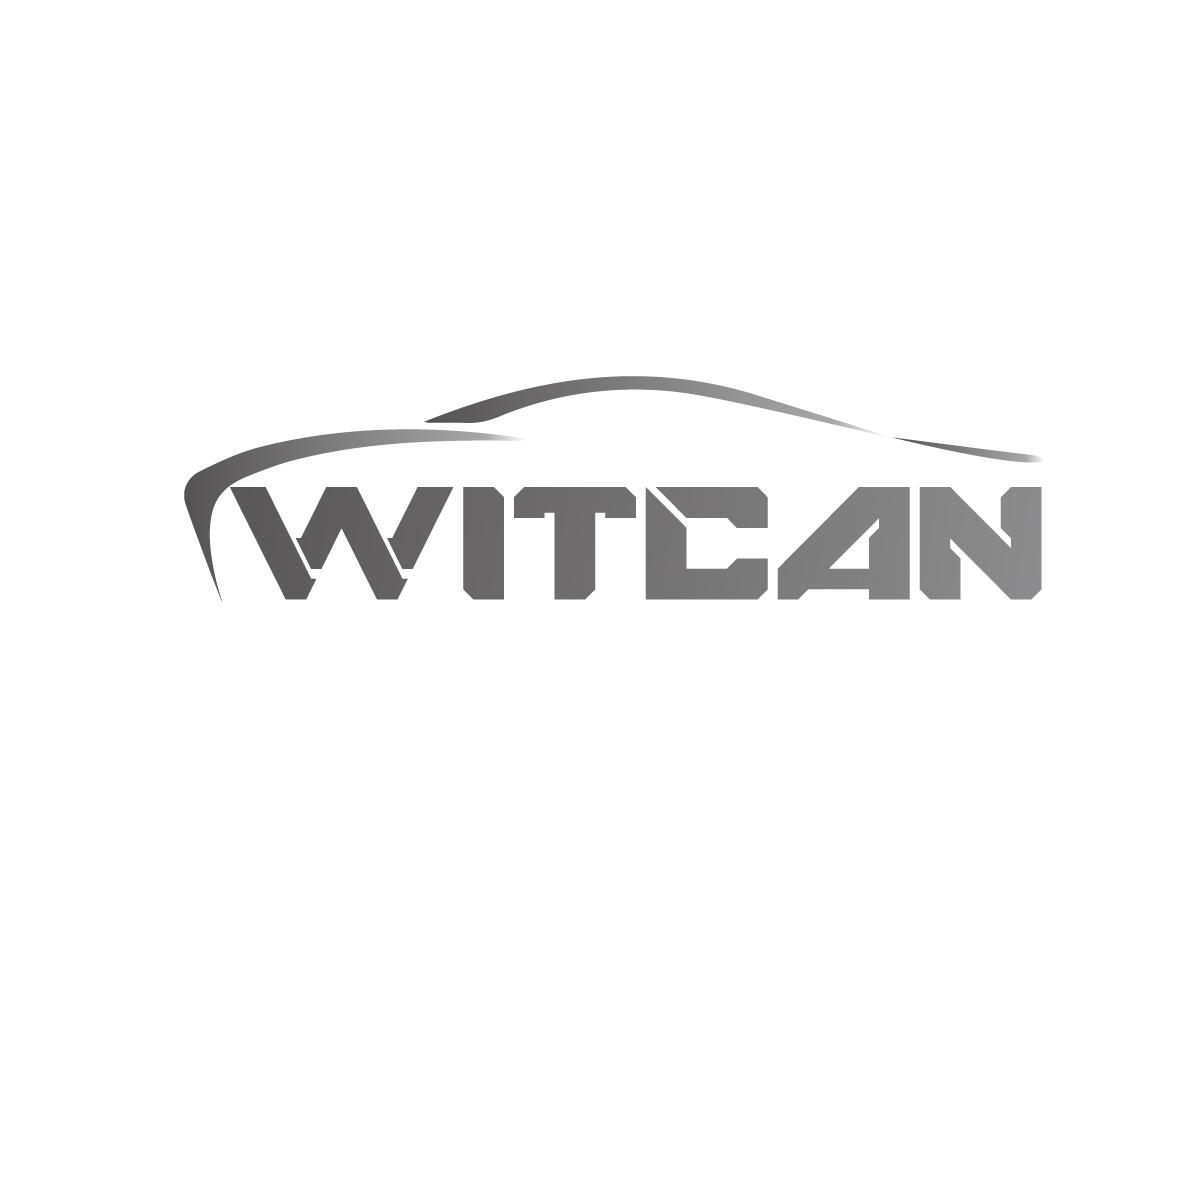 WITCAN